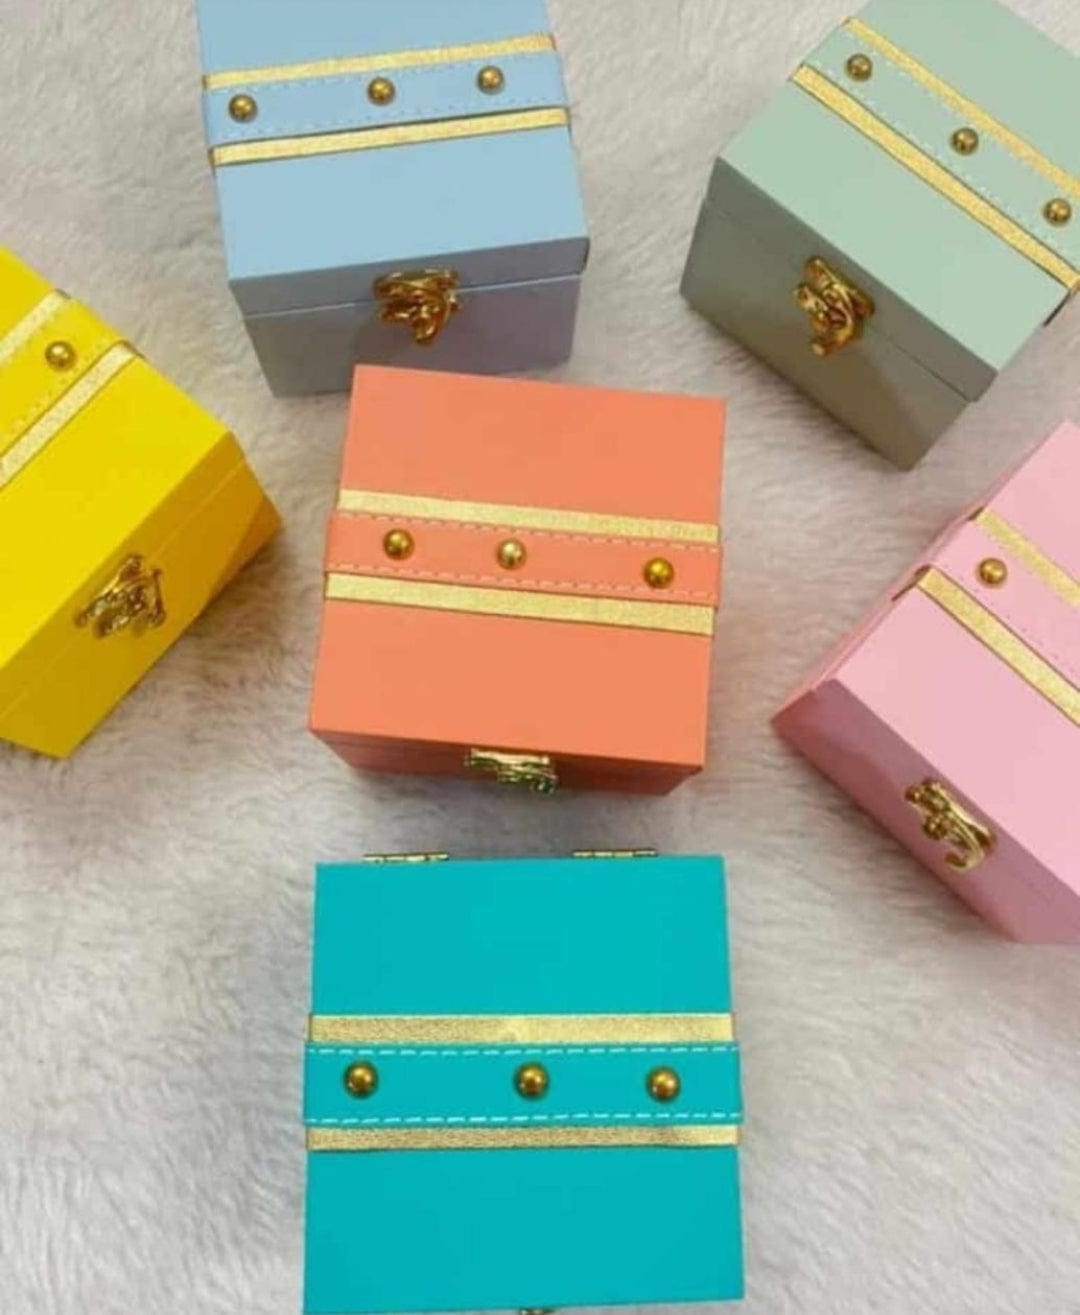 Lamansh leatherite boxes Pack of 100 (4*4 inch) Leather mini trunk boxes at (110 Rs each) for gifting 🎁 / small leatherite lock boxes for wedding favors / Jewellery✨orgainzer box